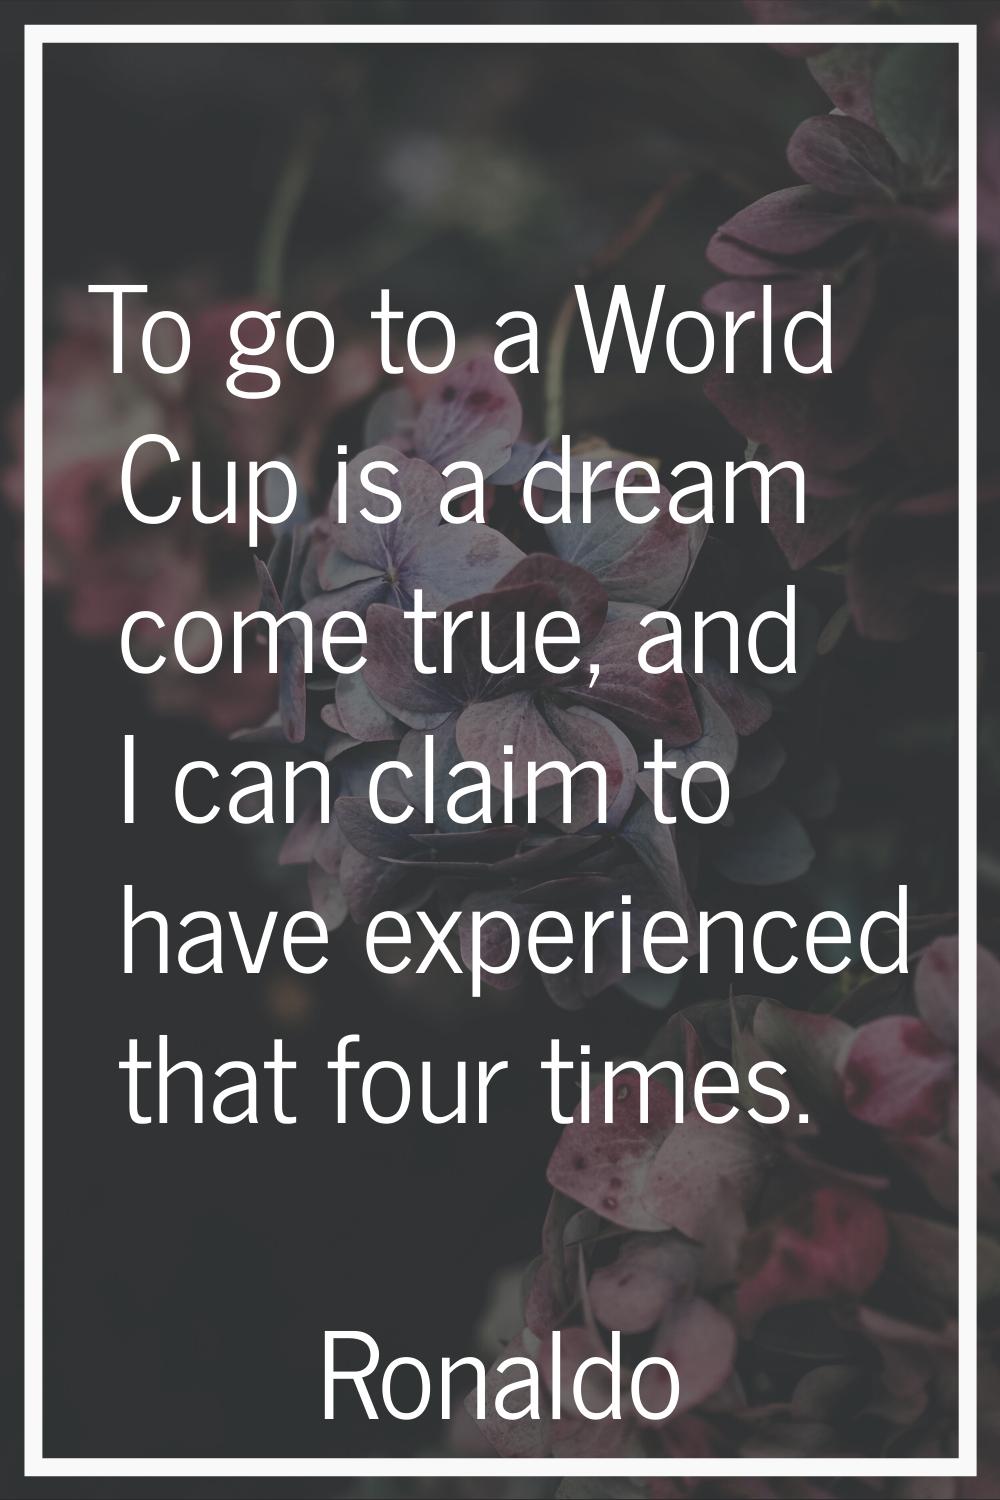 To go to a World Cup is a dream come true, and I can claim to have experienced that four times.